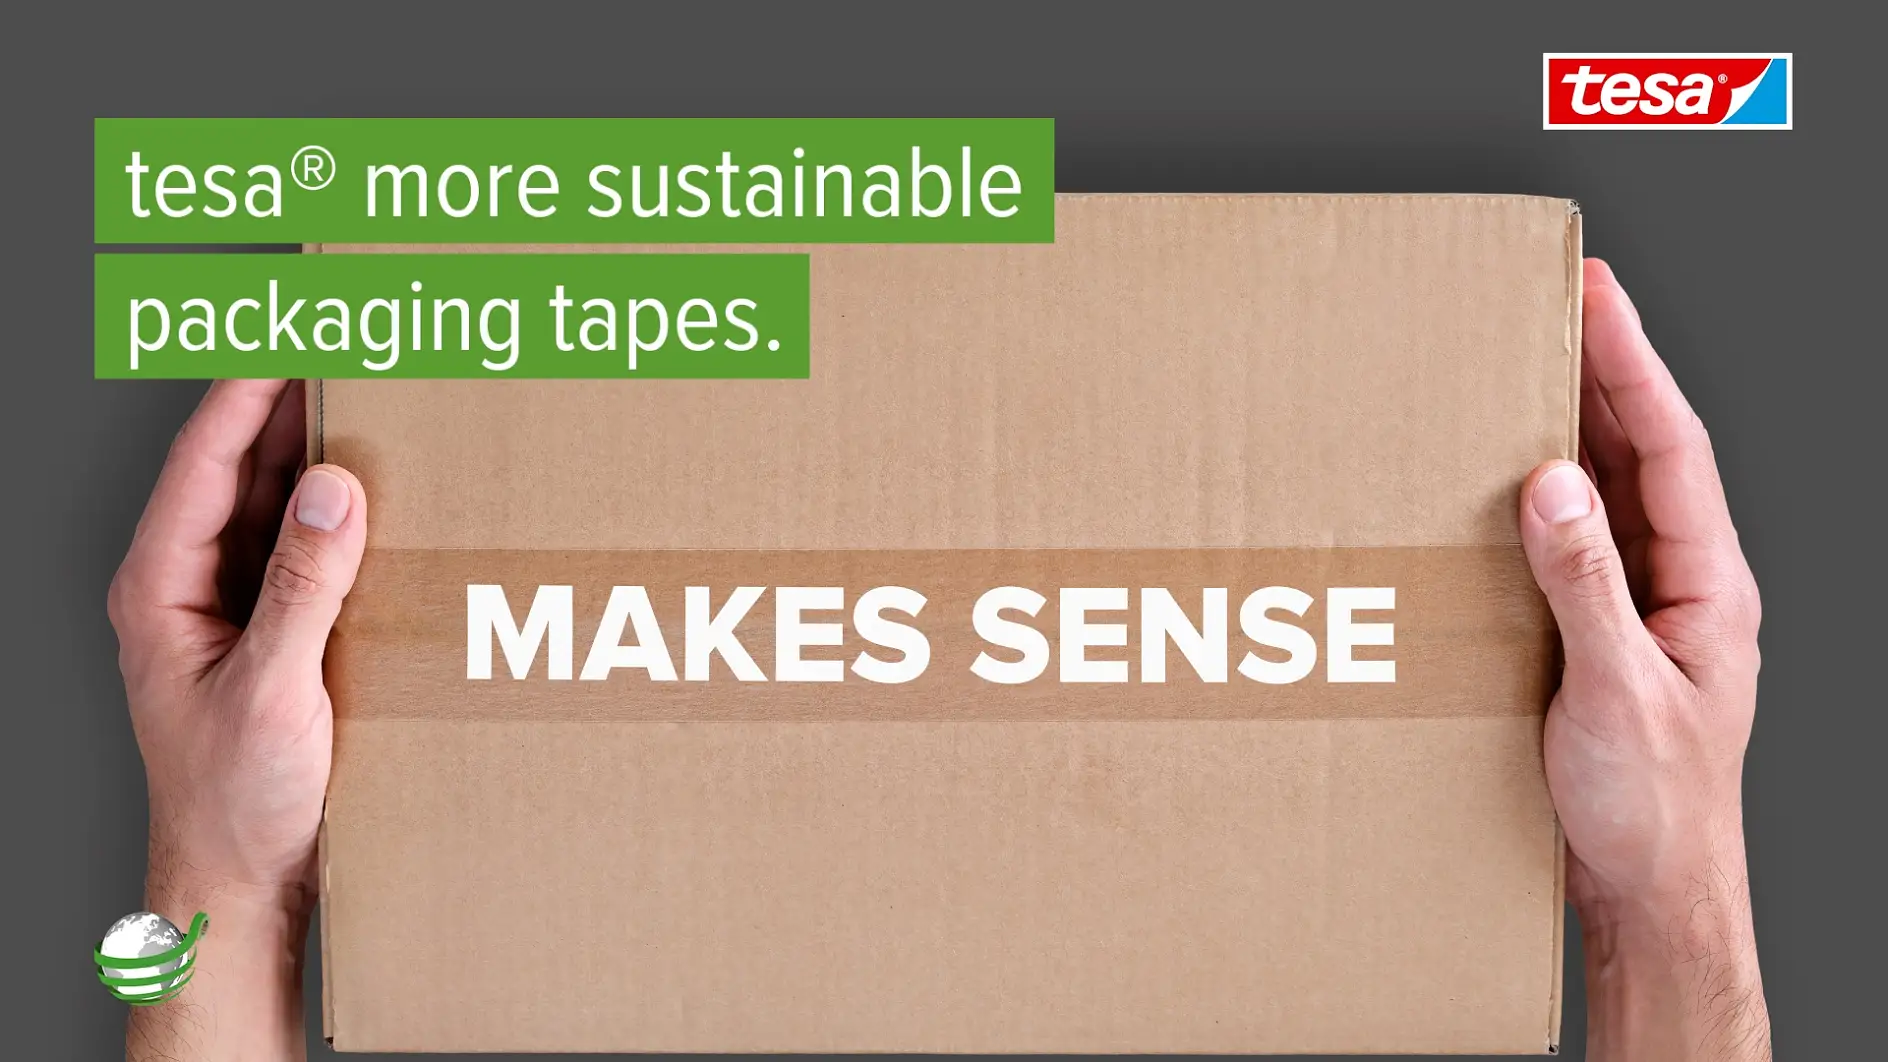 More sustainable packaging tapes make sense.